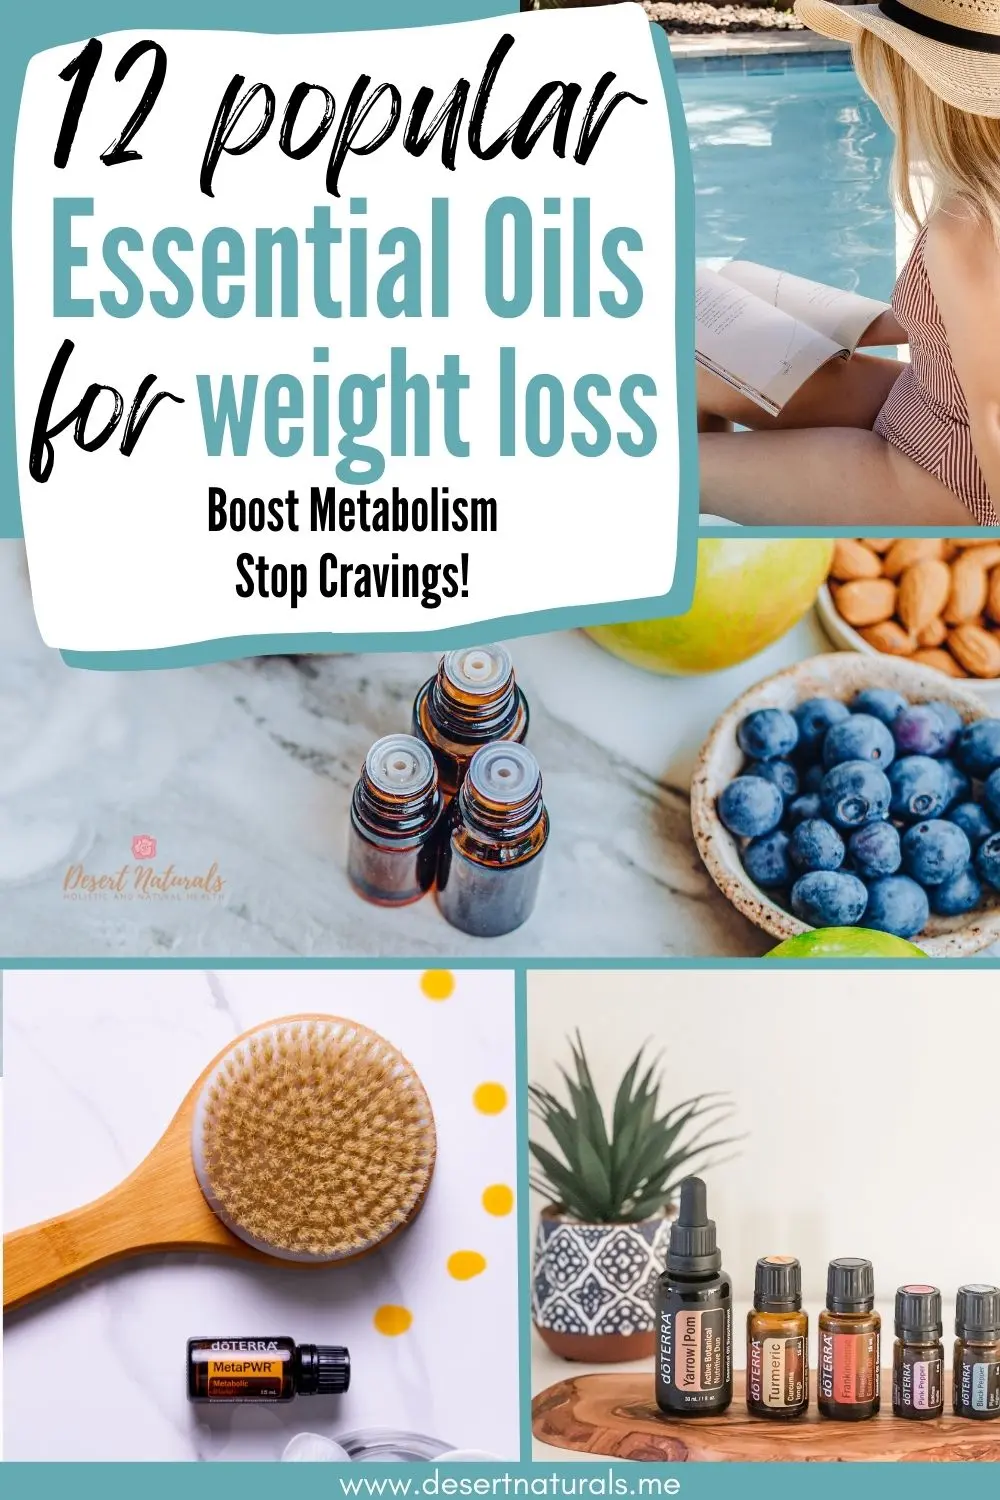 12 best essential oil for weight loss to boos metabolism and stop cravings